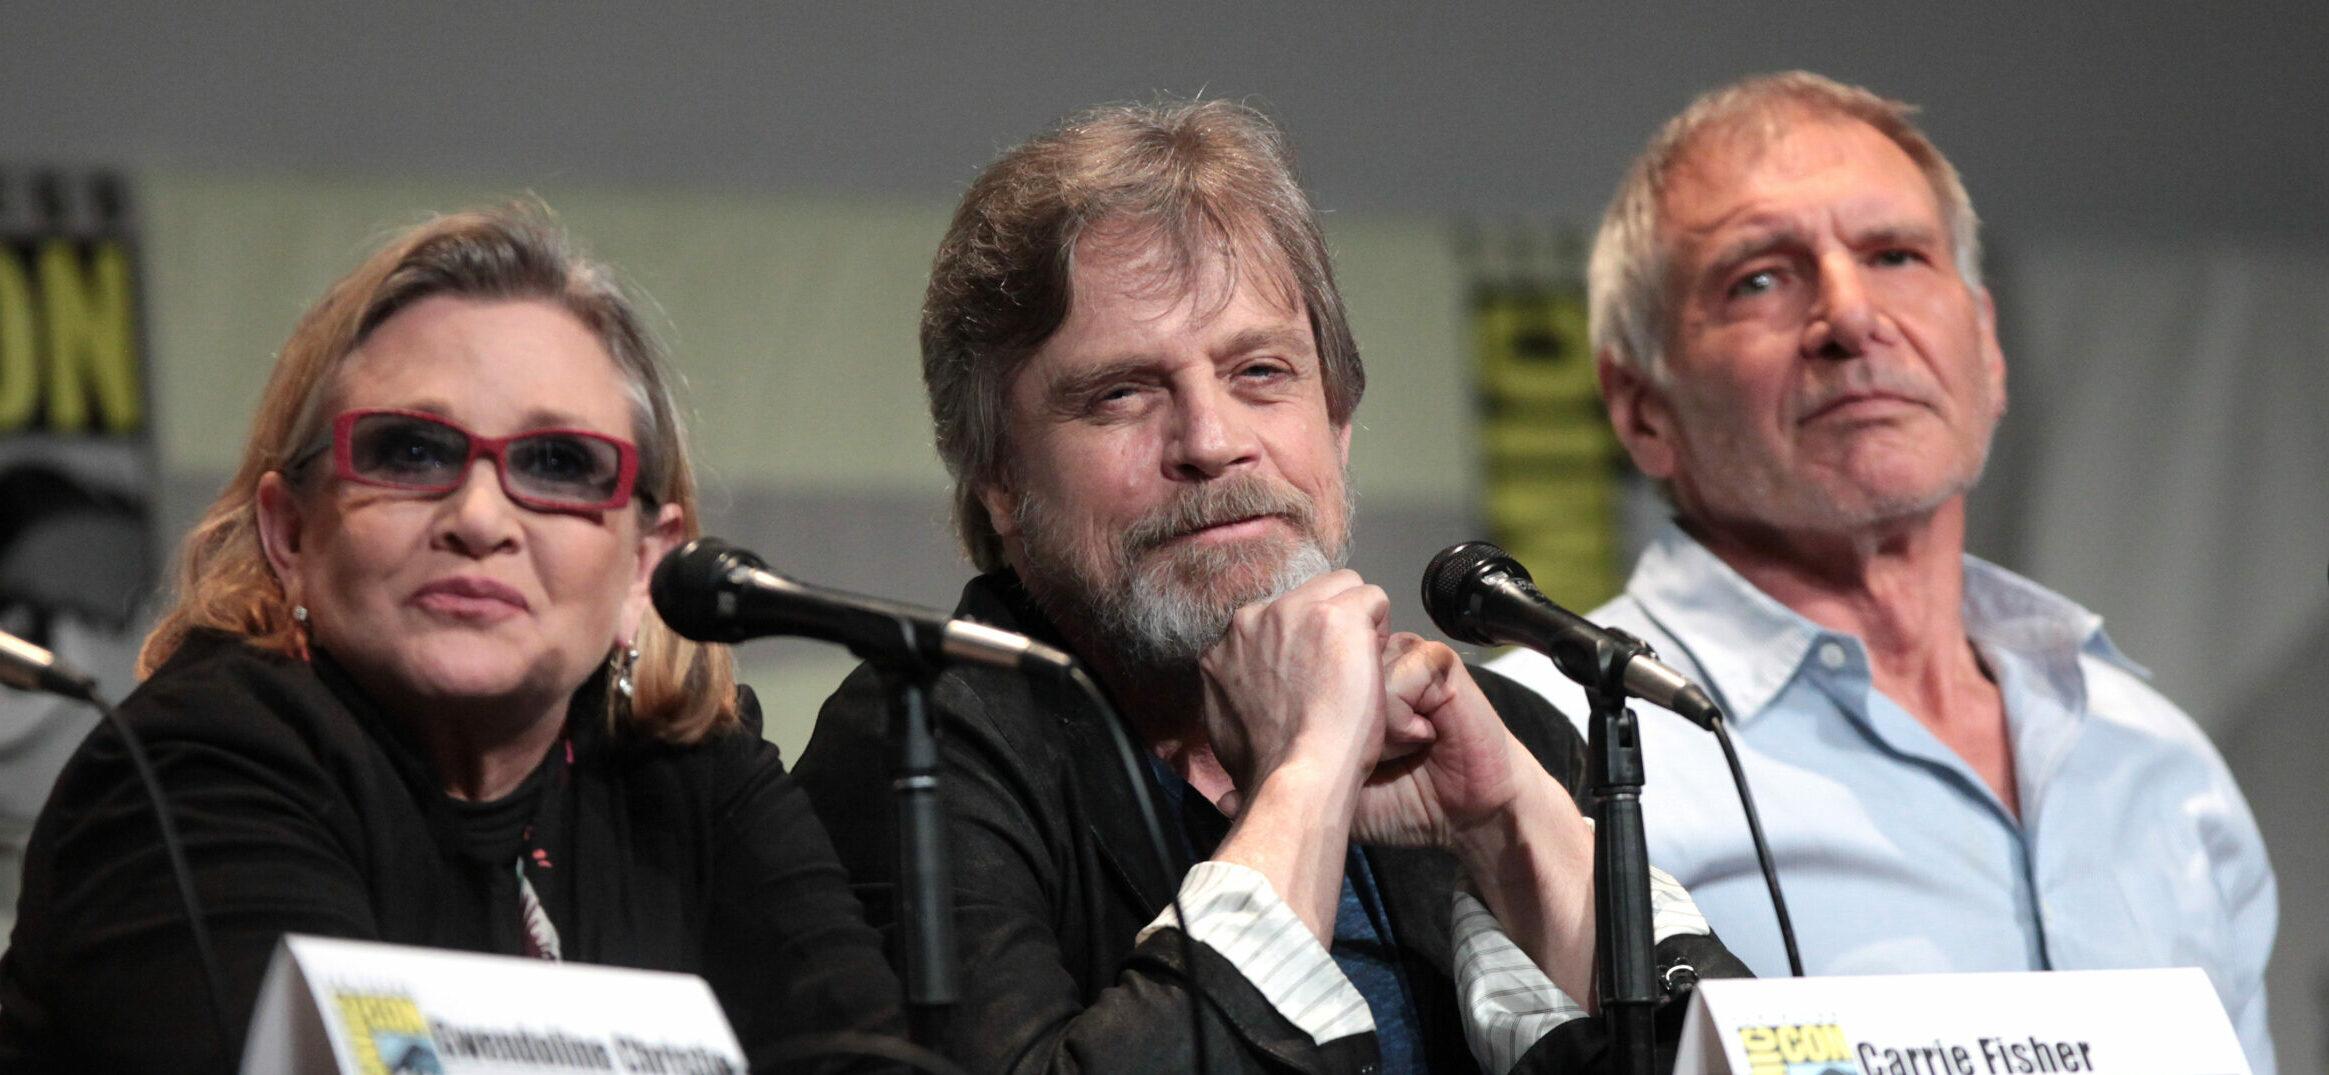 SDCC_2015_-_Carrie_Fisher,_Mark_Hamill_&_Harrison_Ford_(19060574883)